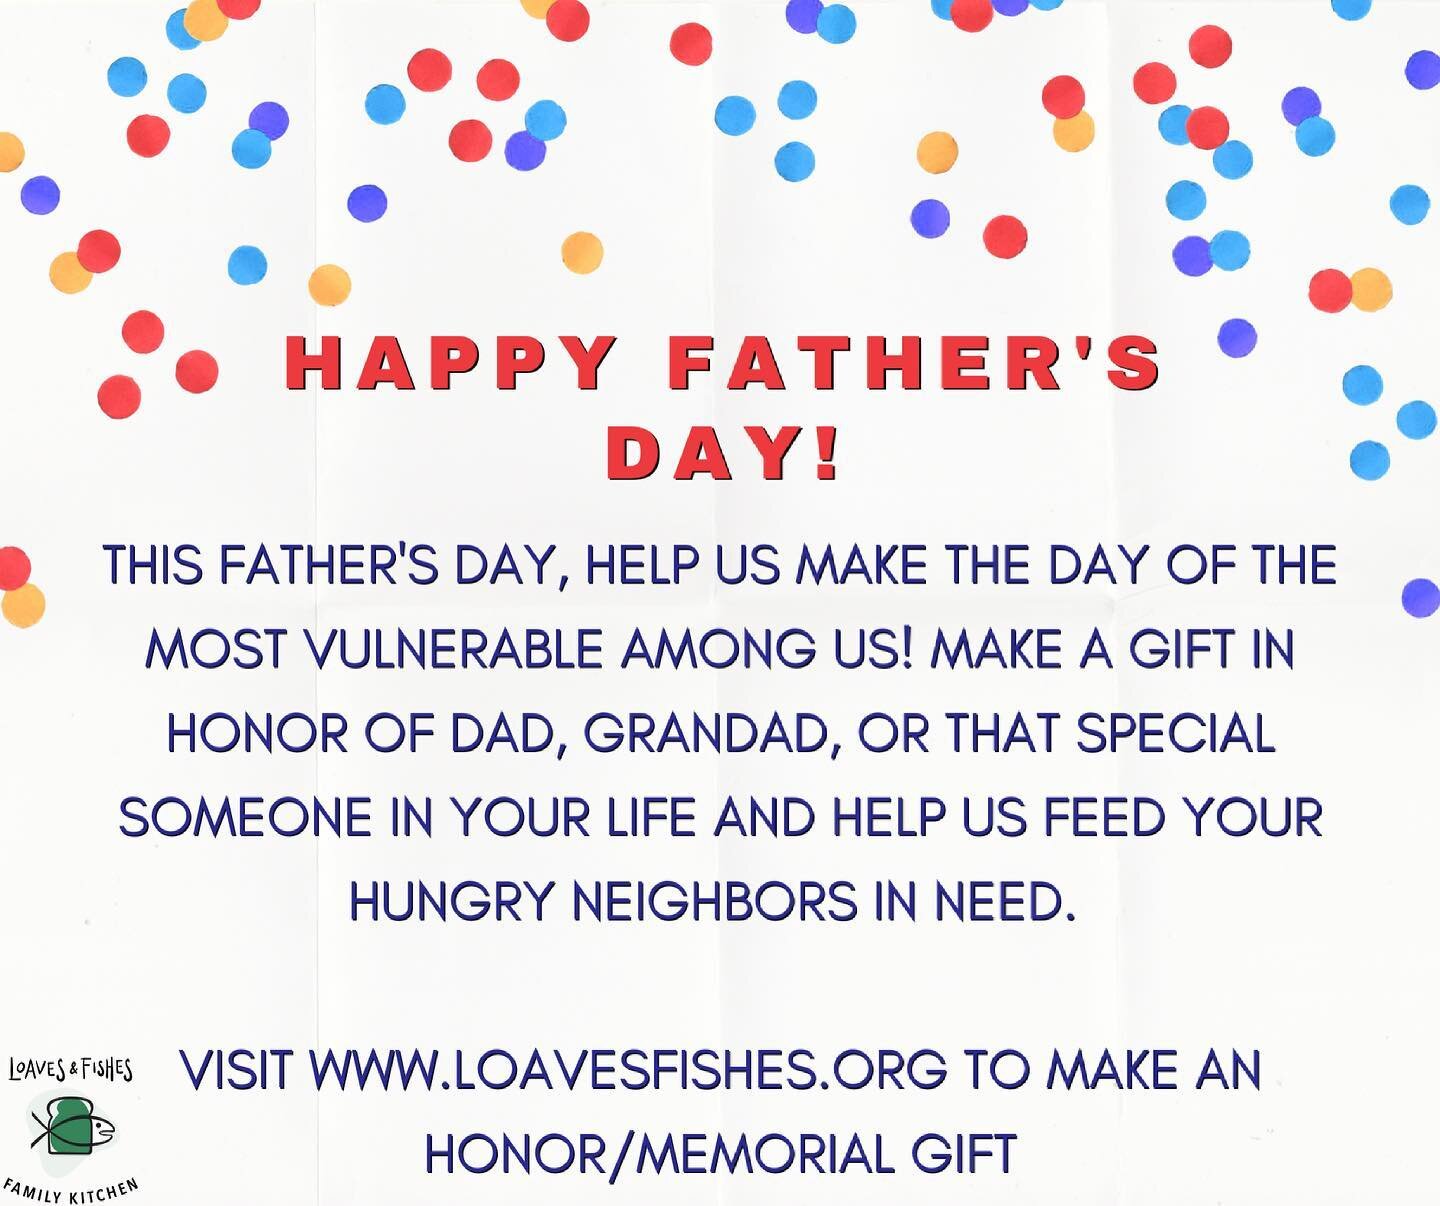 This Father's Day,  help us make the day of the most vulnerable among us! Make a gift in honor of Dad, Grandad, or that special someone in your life and help us feed your hungry neighbors in need. 

Visit www.loavesfishes.org to make an honor/memoria